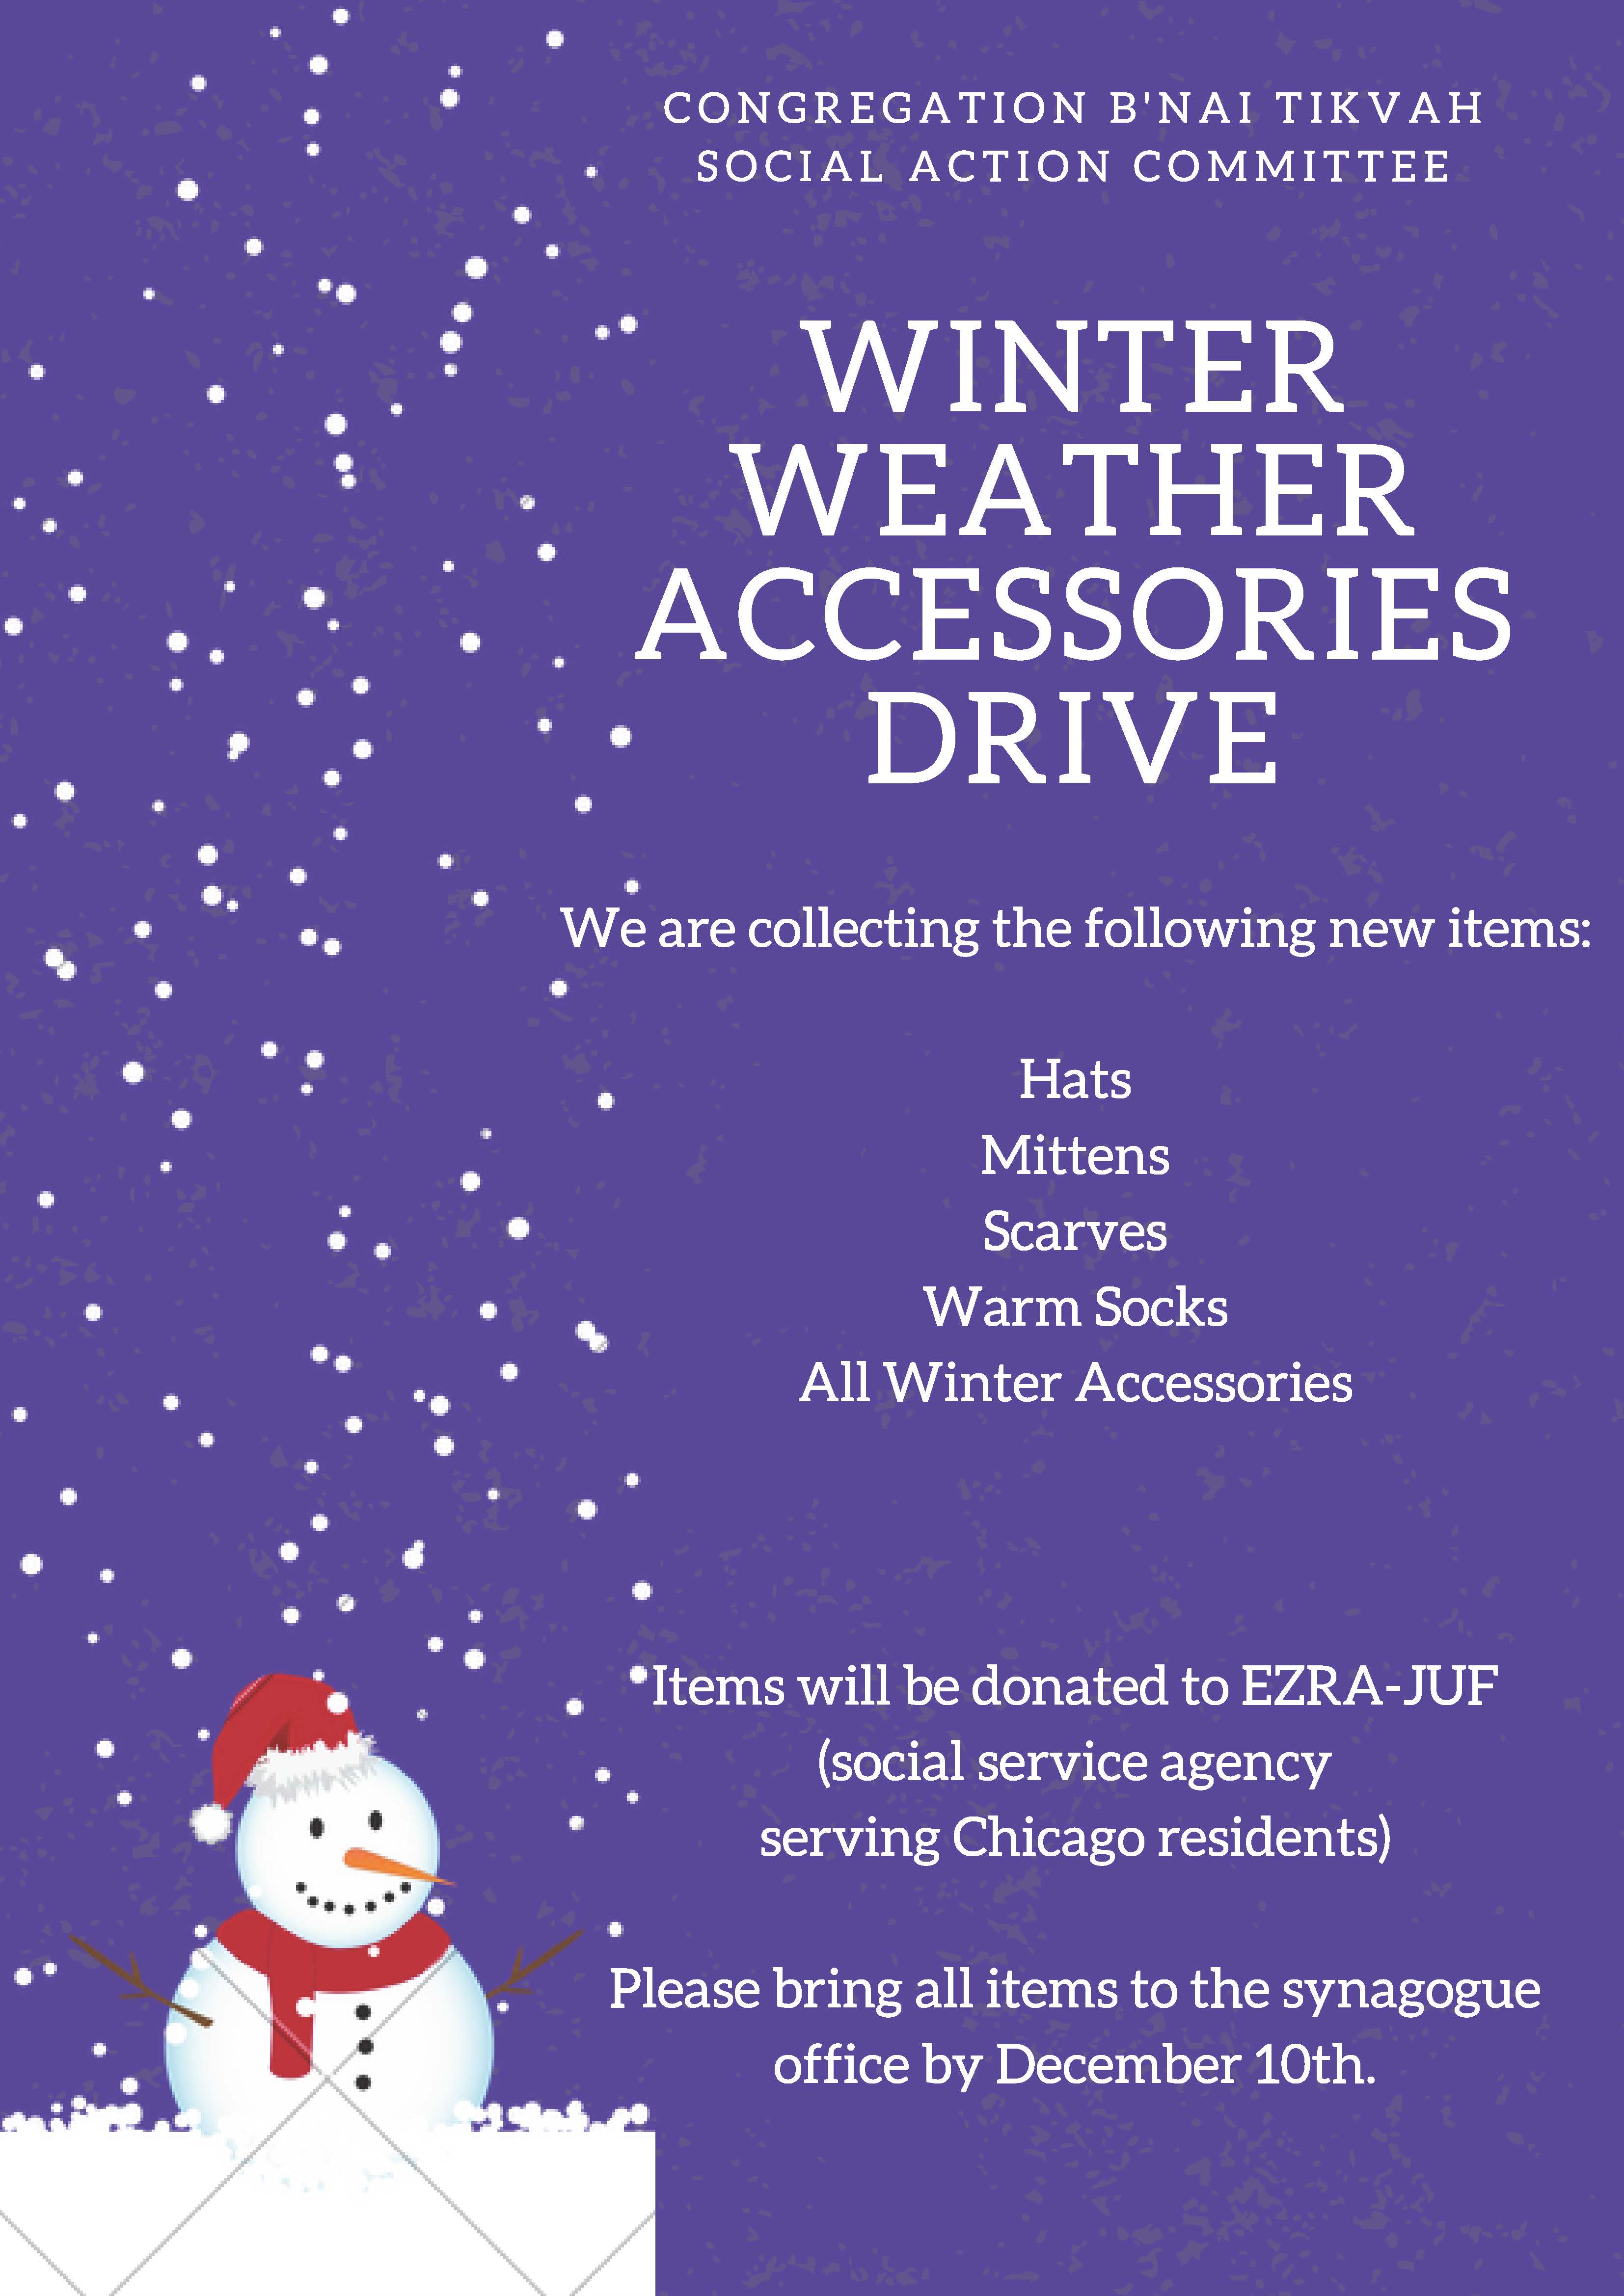 B'nai Tikvah Social Action Committee Winter Weather Accessories Drive